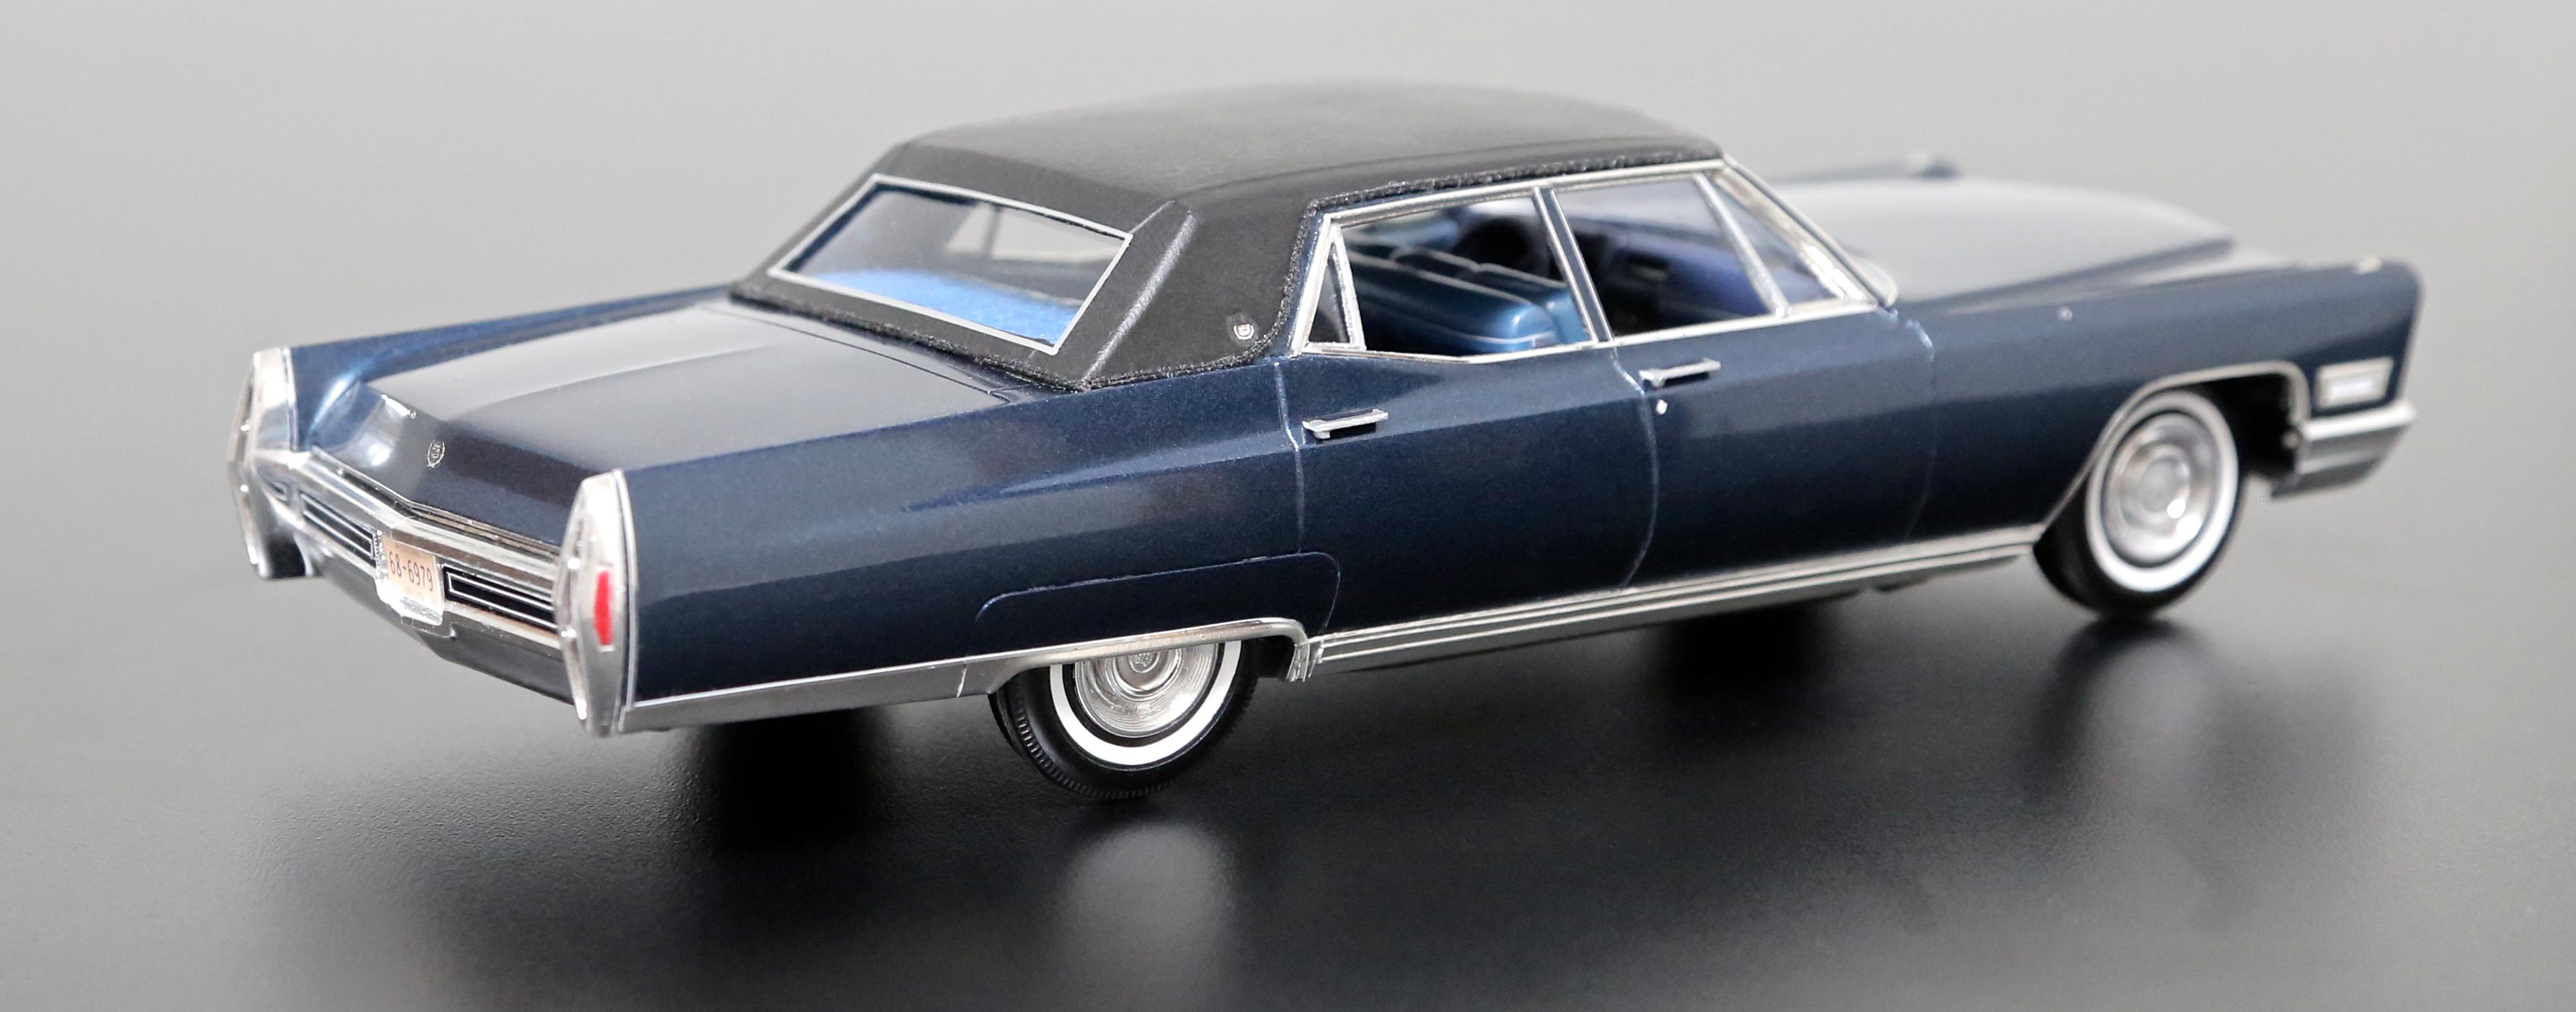 1968-fleetwood-brougham-by-cadillac-model-cars-model-cars